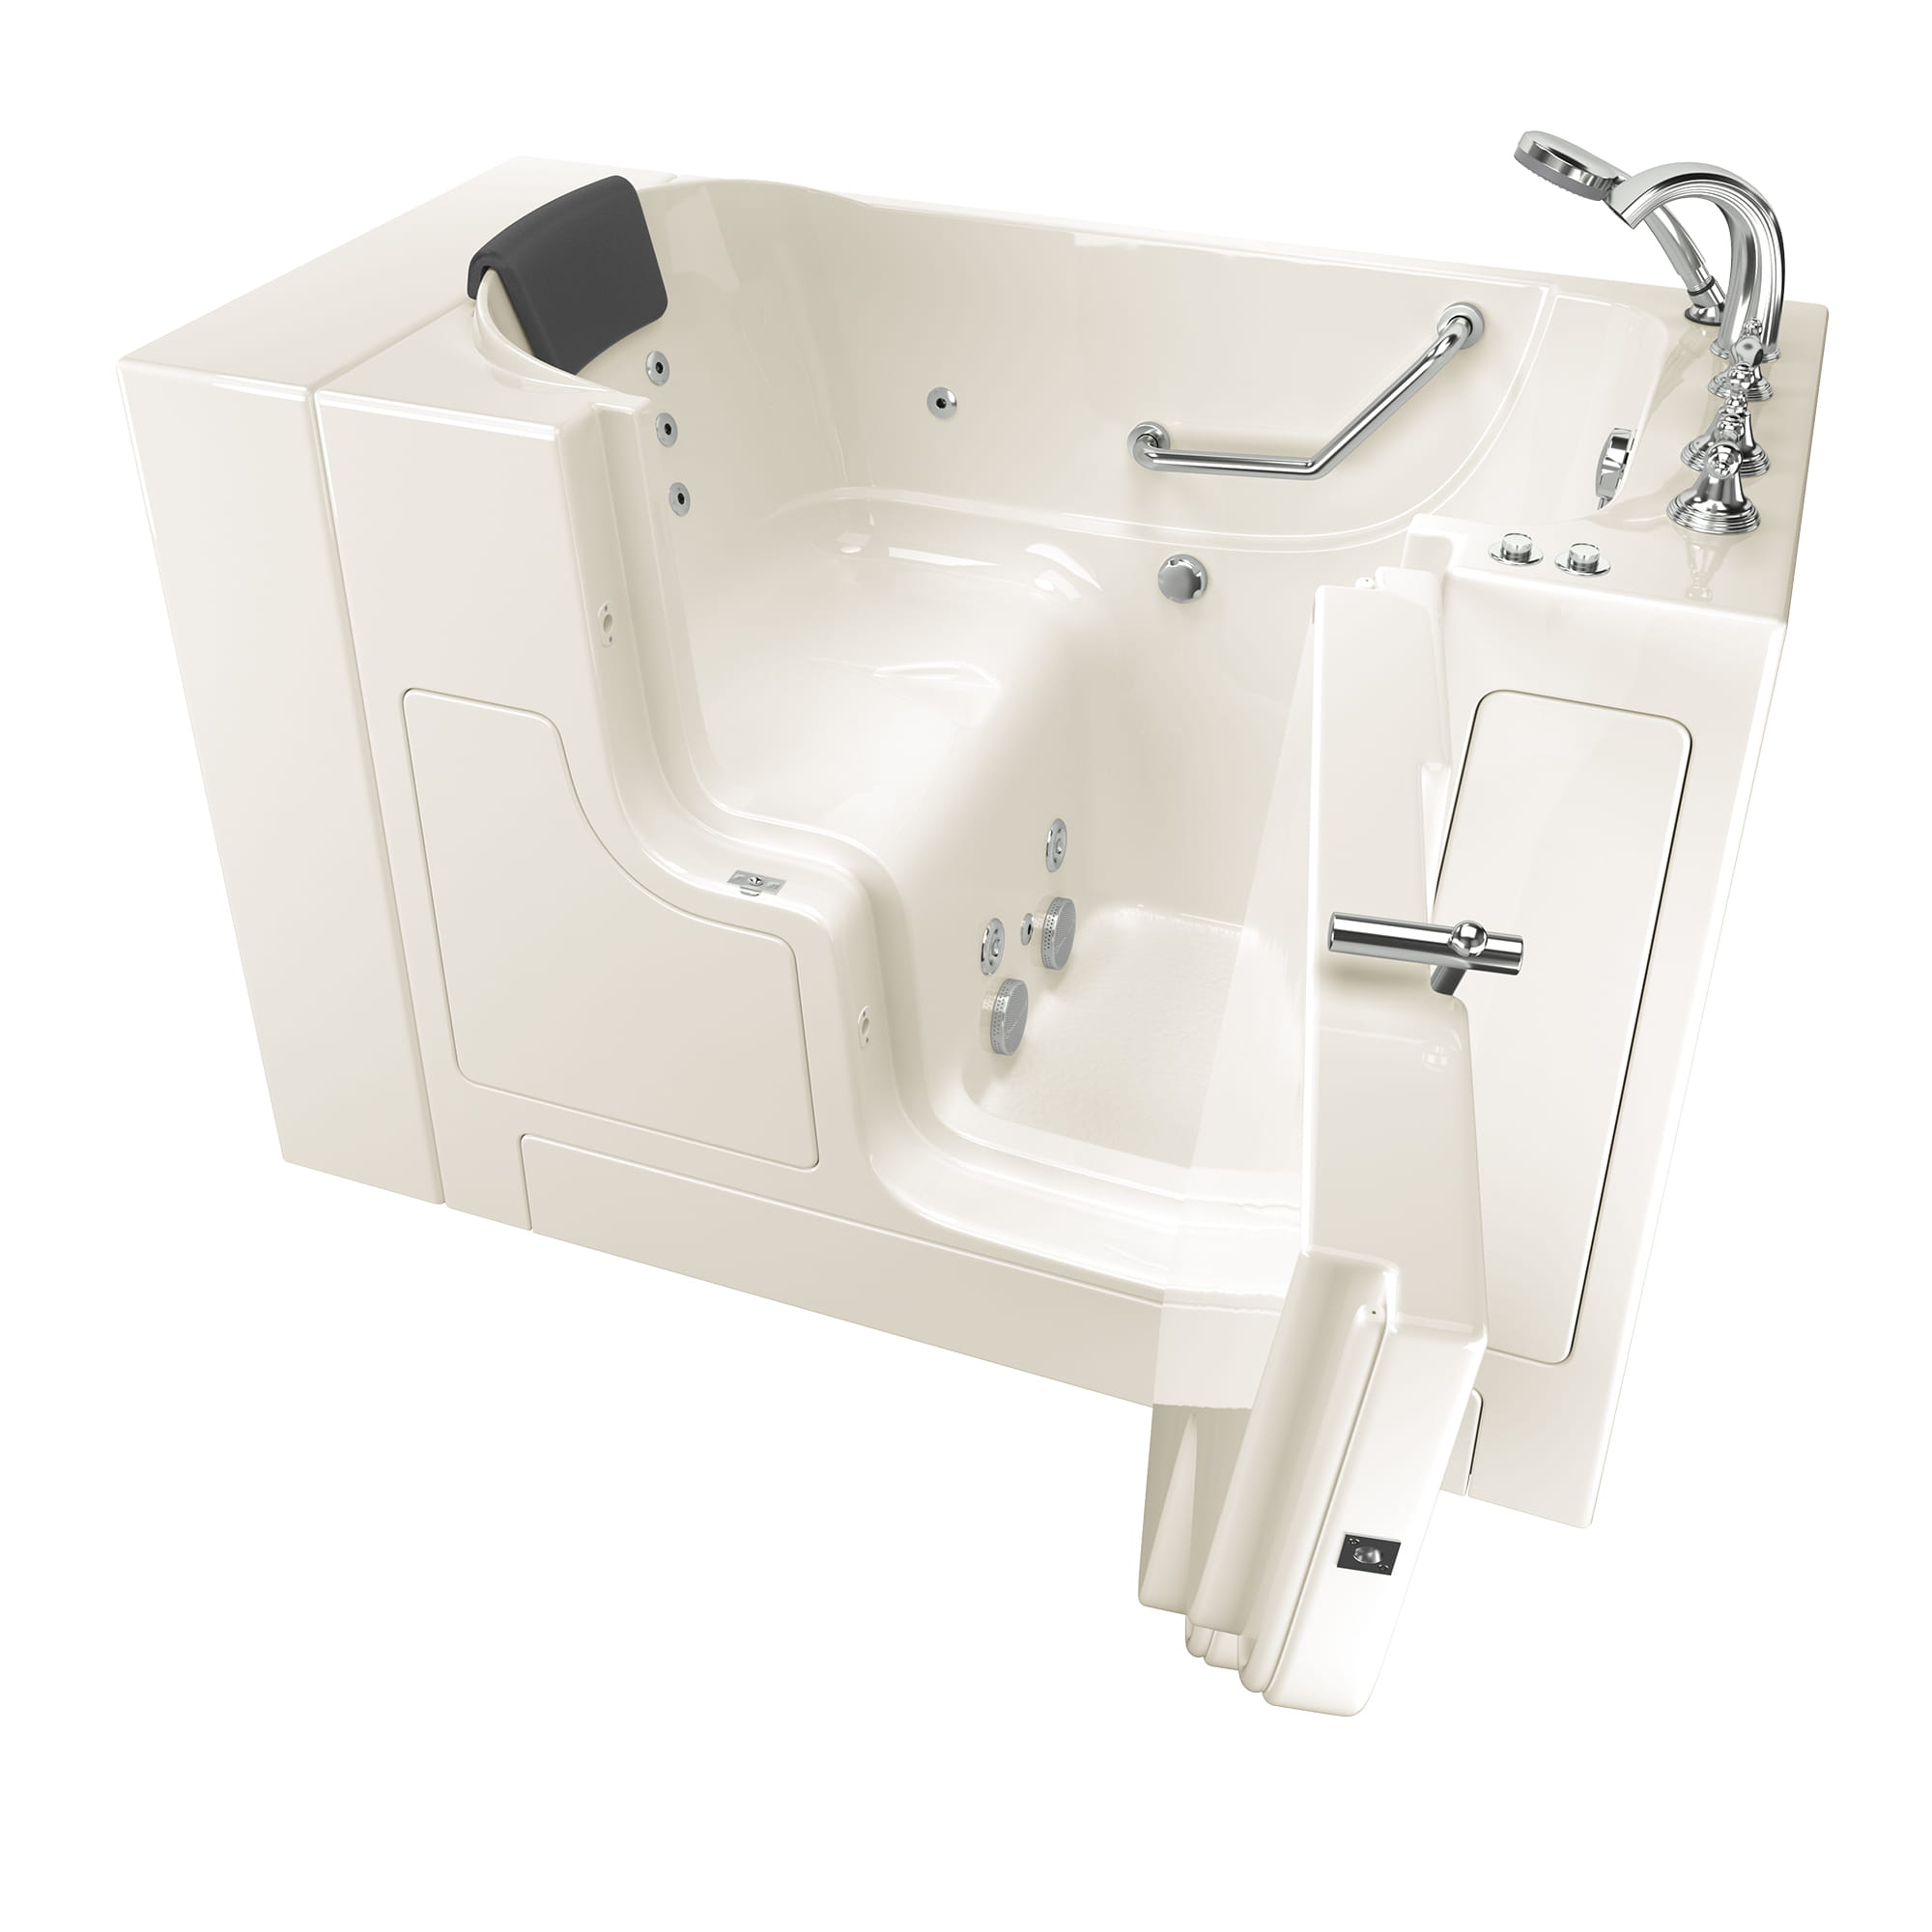 Gelcoat Premium Series 30 x 52 -Inch Walk-in Tub With Whirlpool System - Right-Hand Drain With Faucet